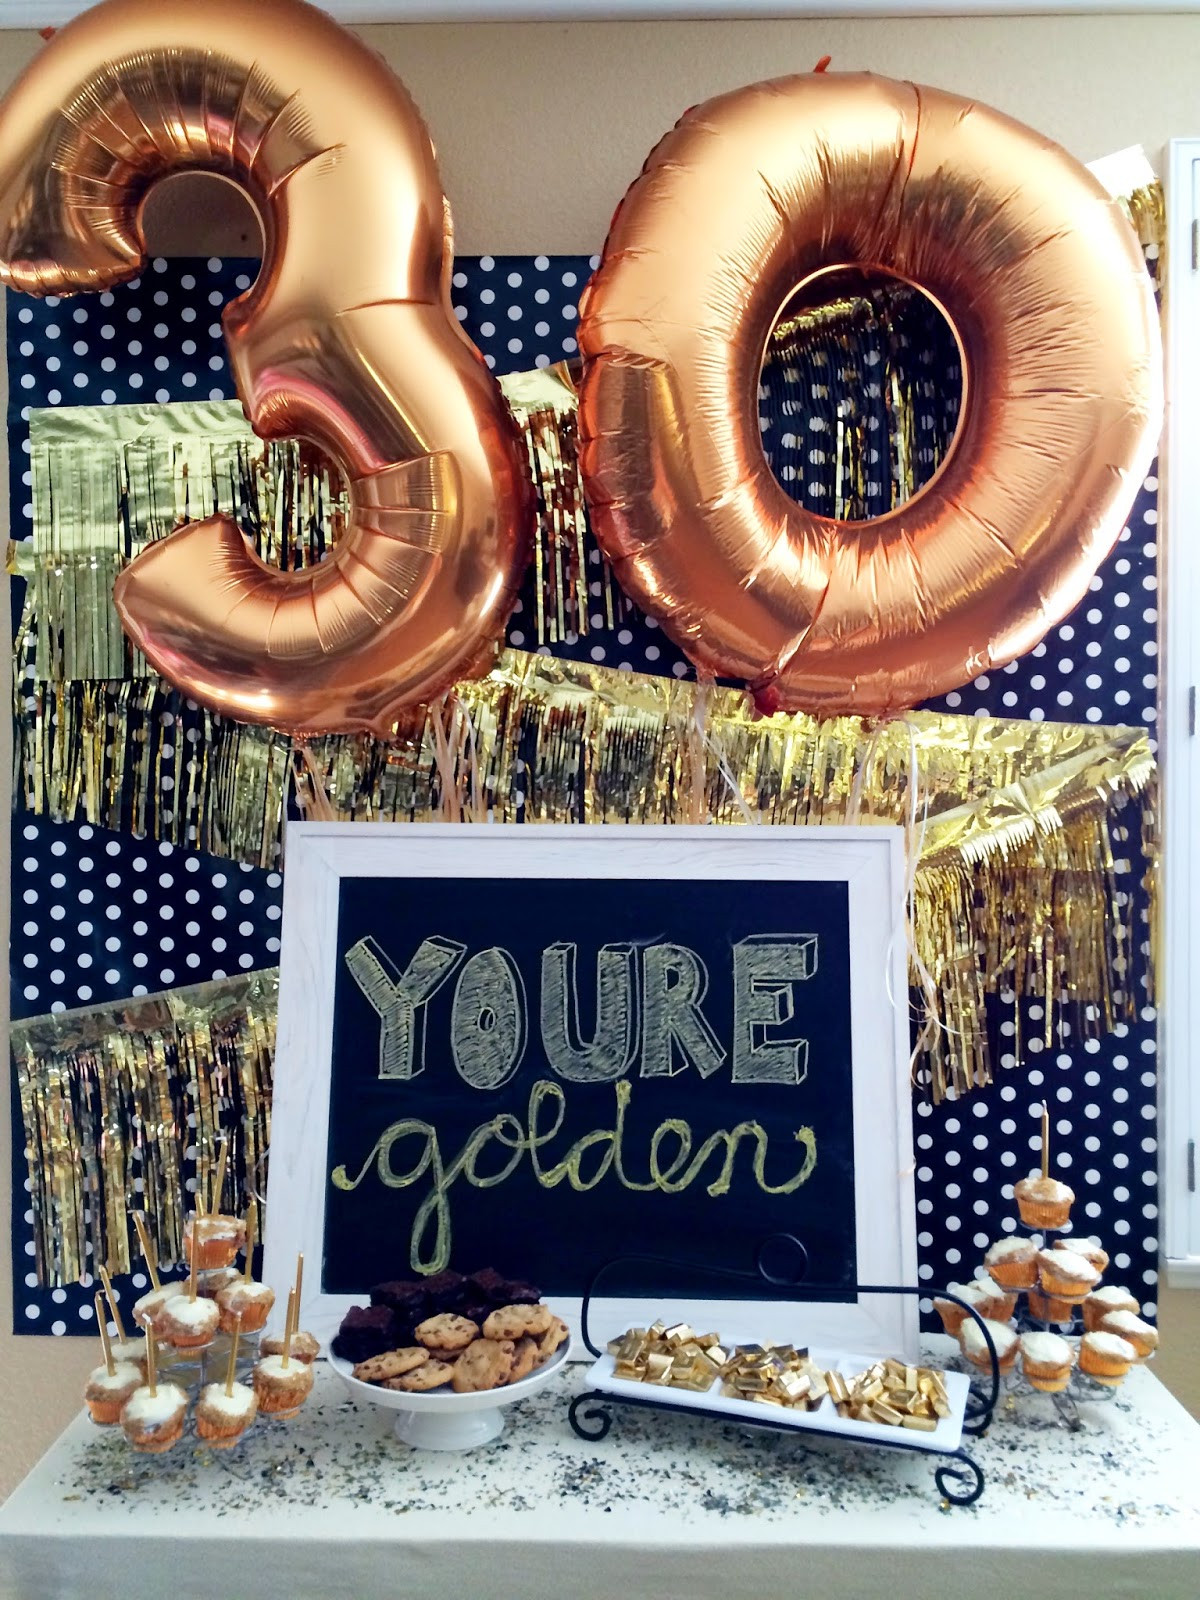 30 Birthday Party Decorations
 7 Clever Themes for a Smashing 30th Birthday Party